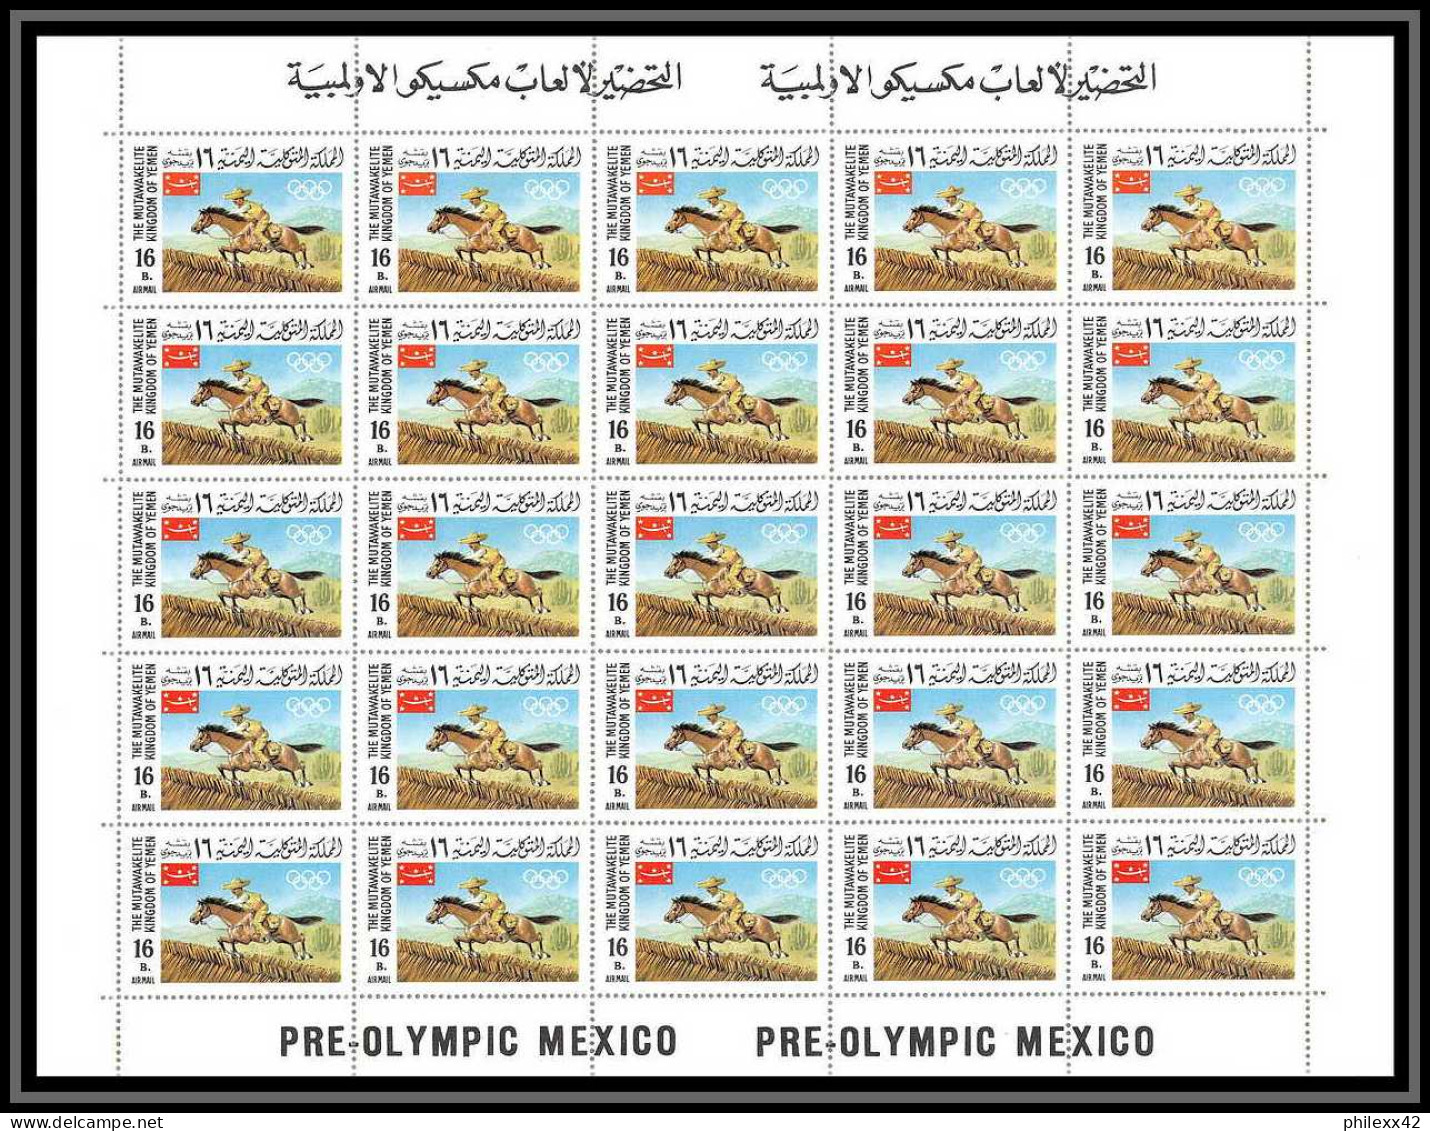 172e Yemen kingdom MNH ** N° 403 / 410 A jeux olympiques (summer olympic games) Mexico 68 (Soccer) feuilles sheets